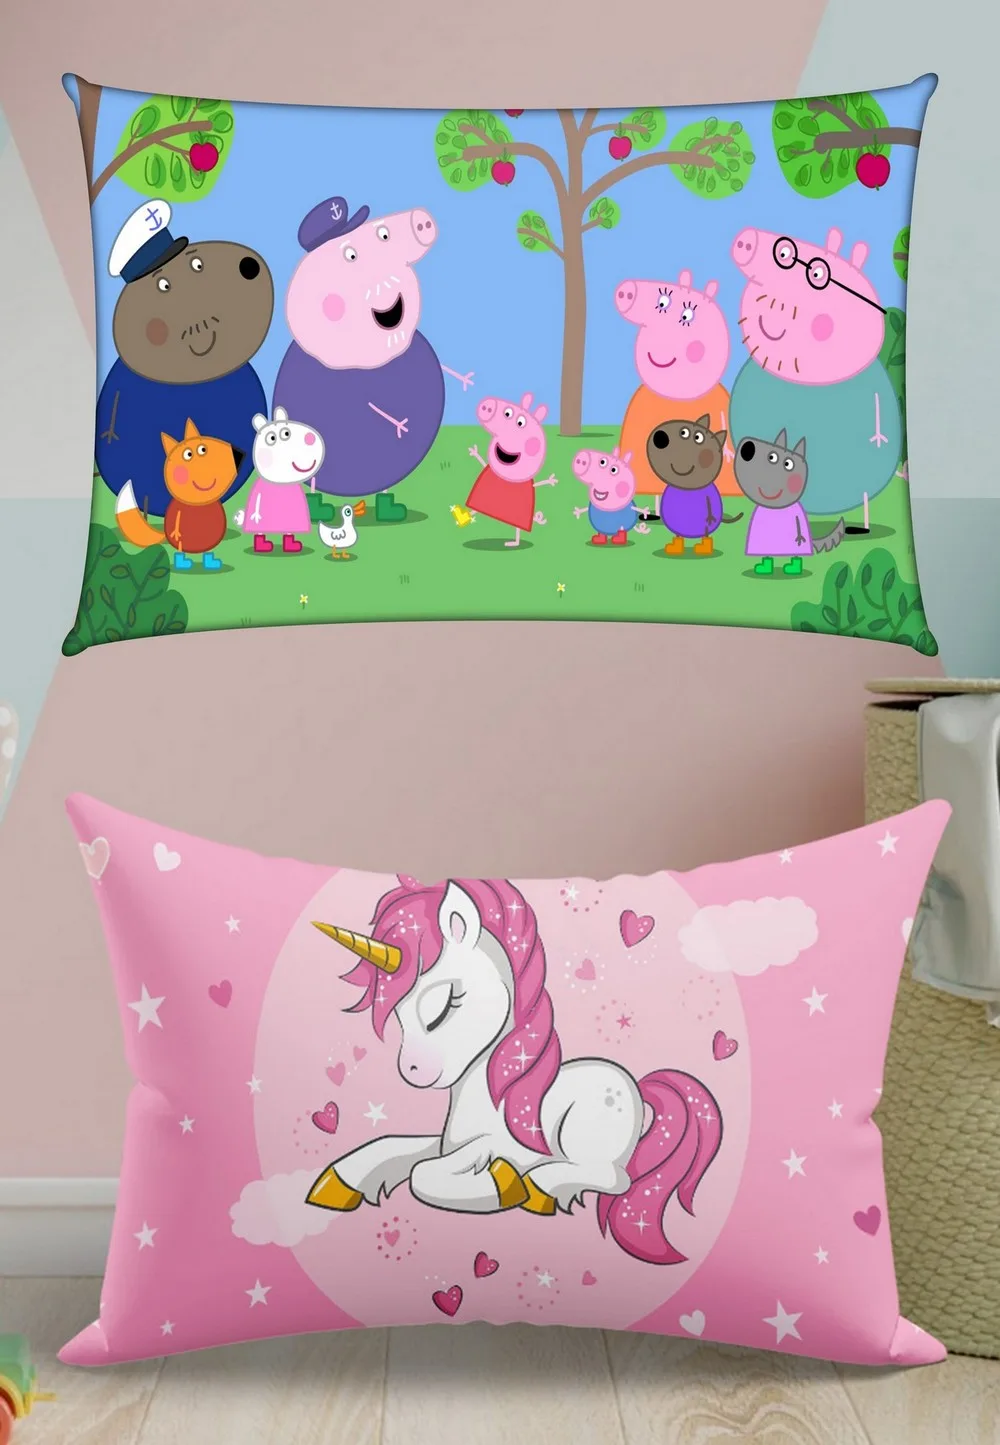 Unicorn Pillow, Pig Family Cover, 18x12 Inches, Set of 2